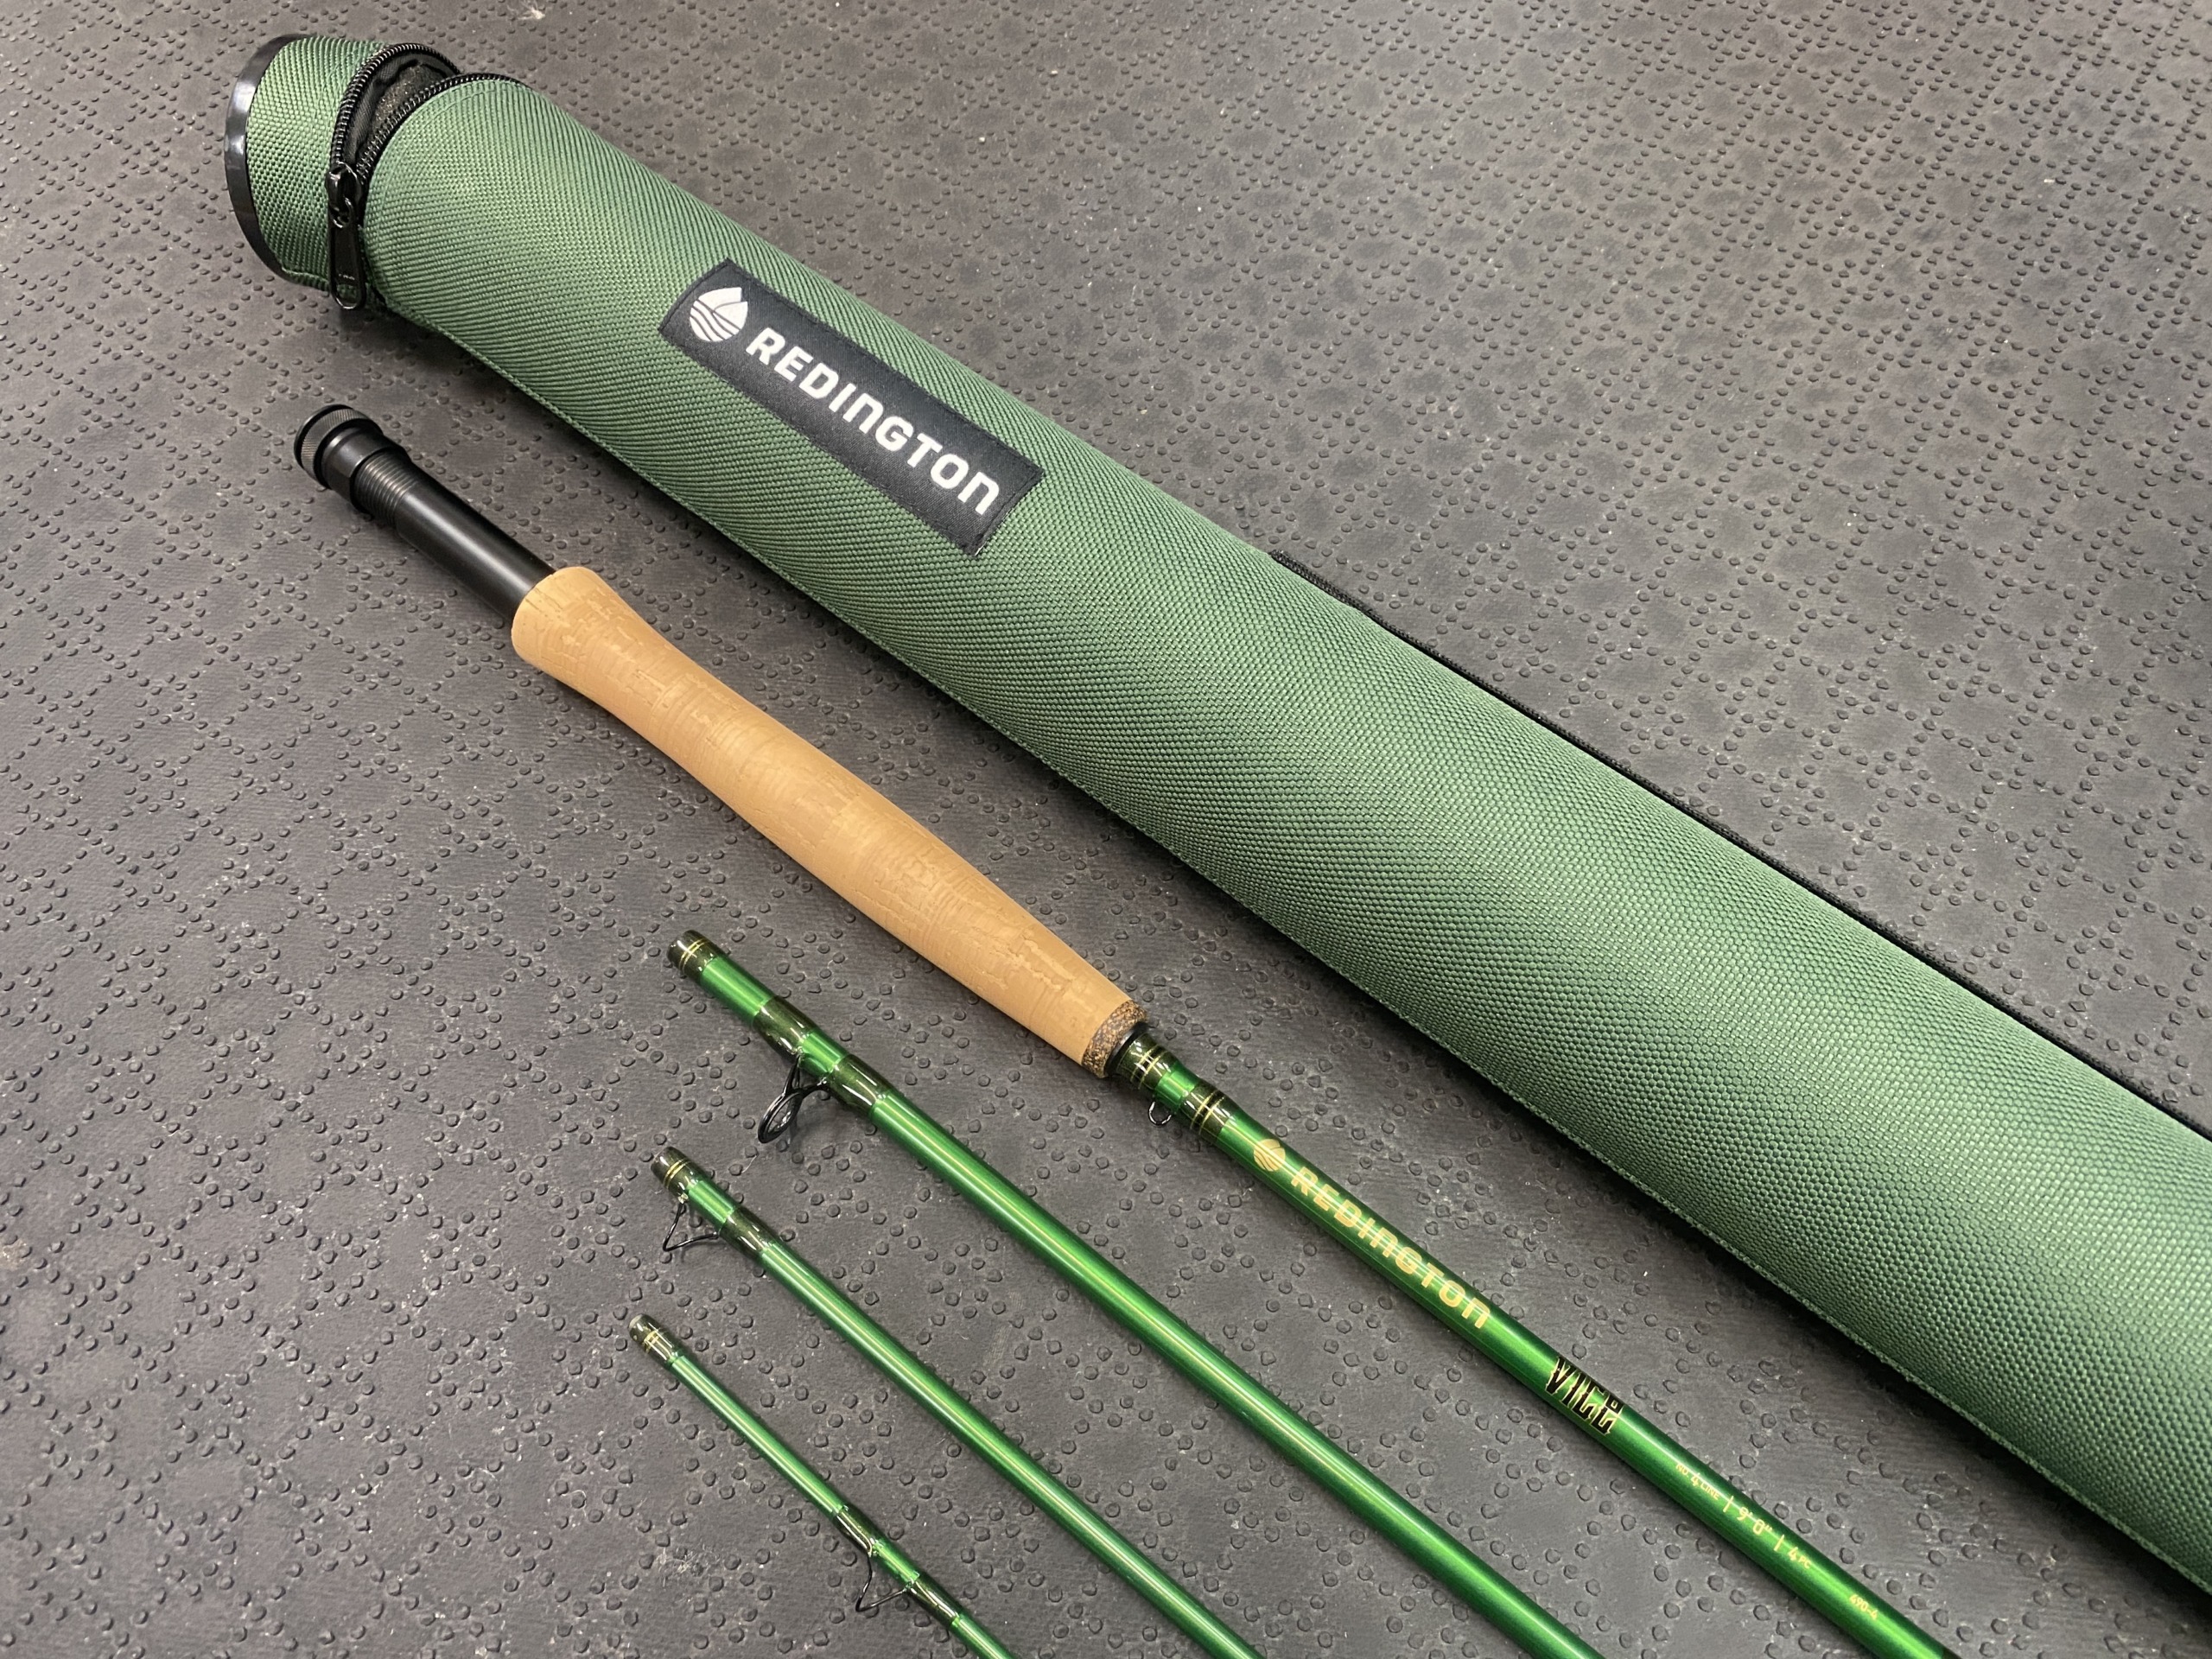 Redington Fly Fishing Rod Fishing Rods & Poles 4 wt Line Weight 4 Pieces